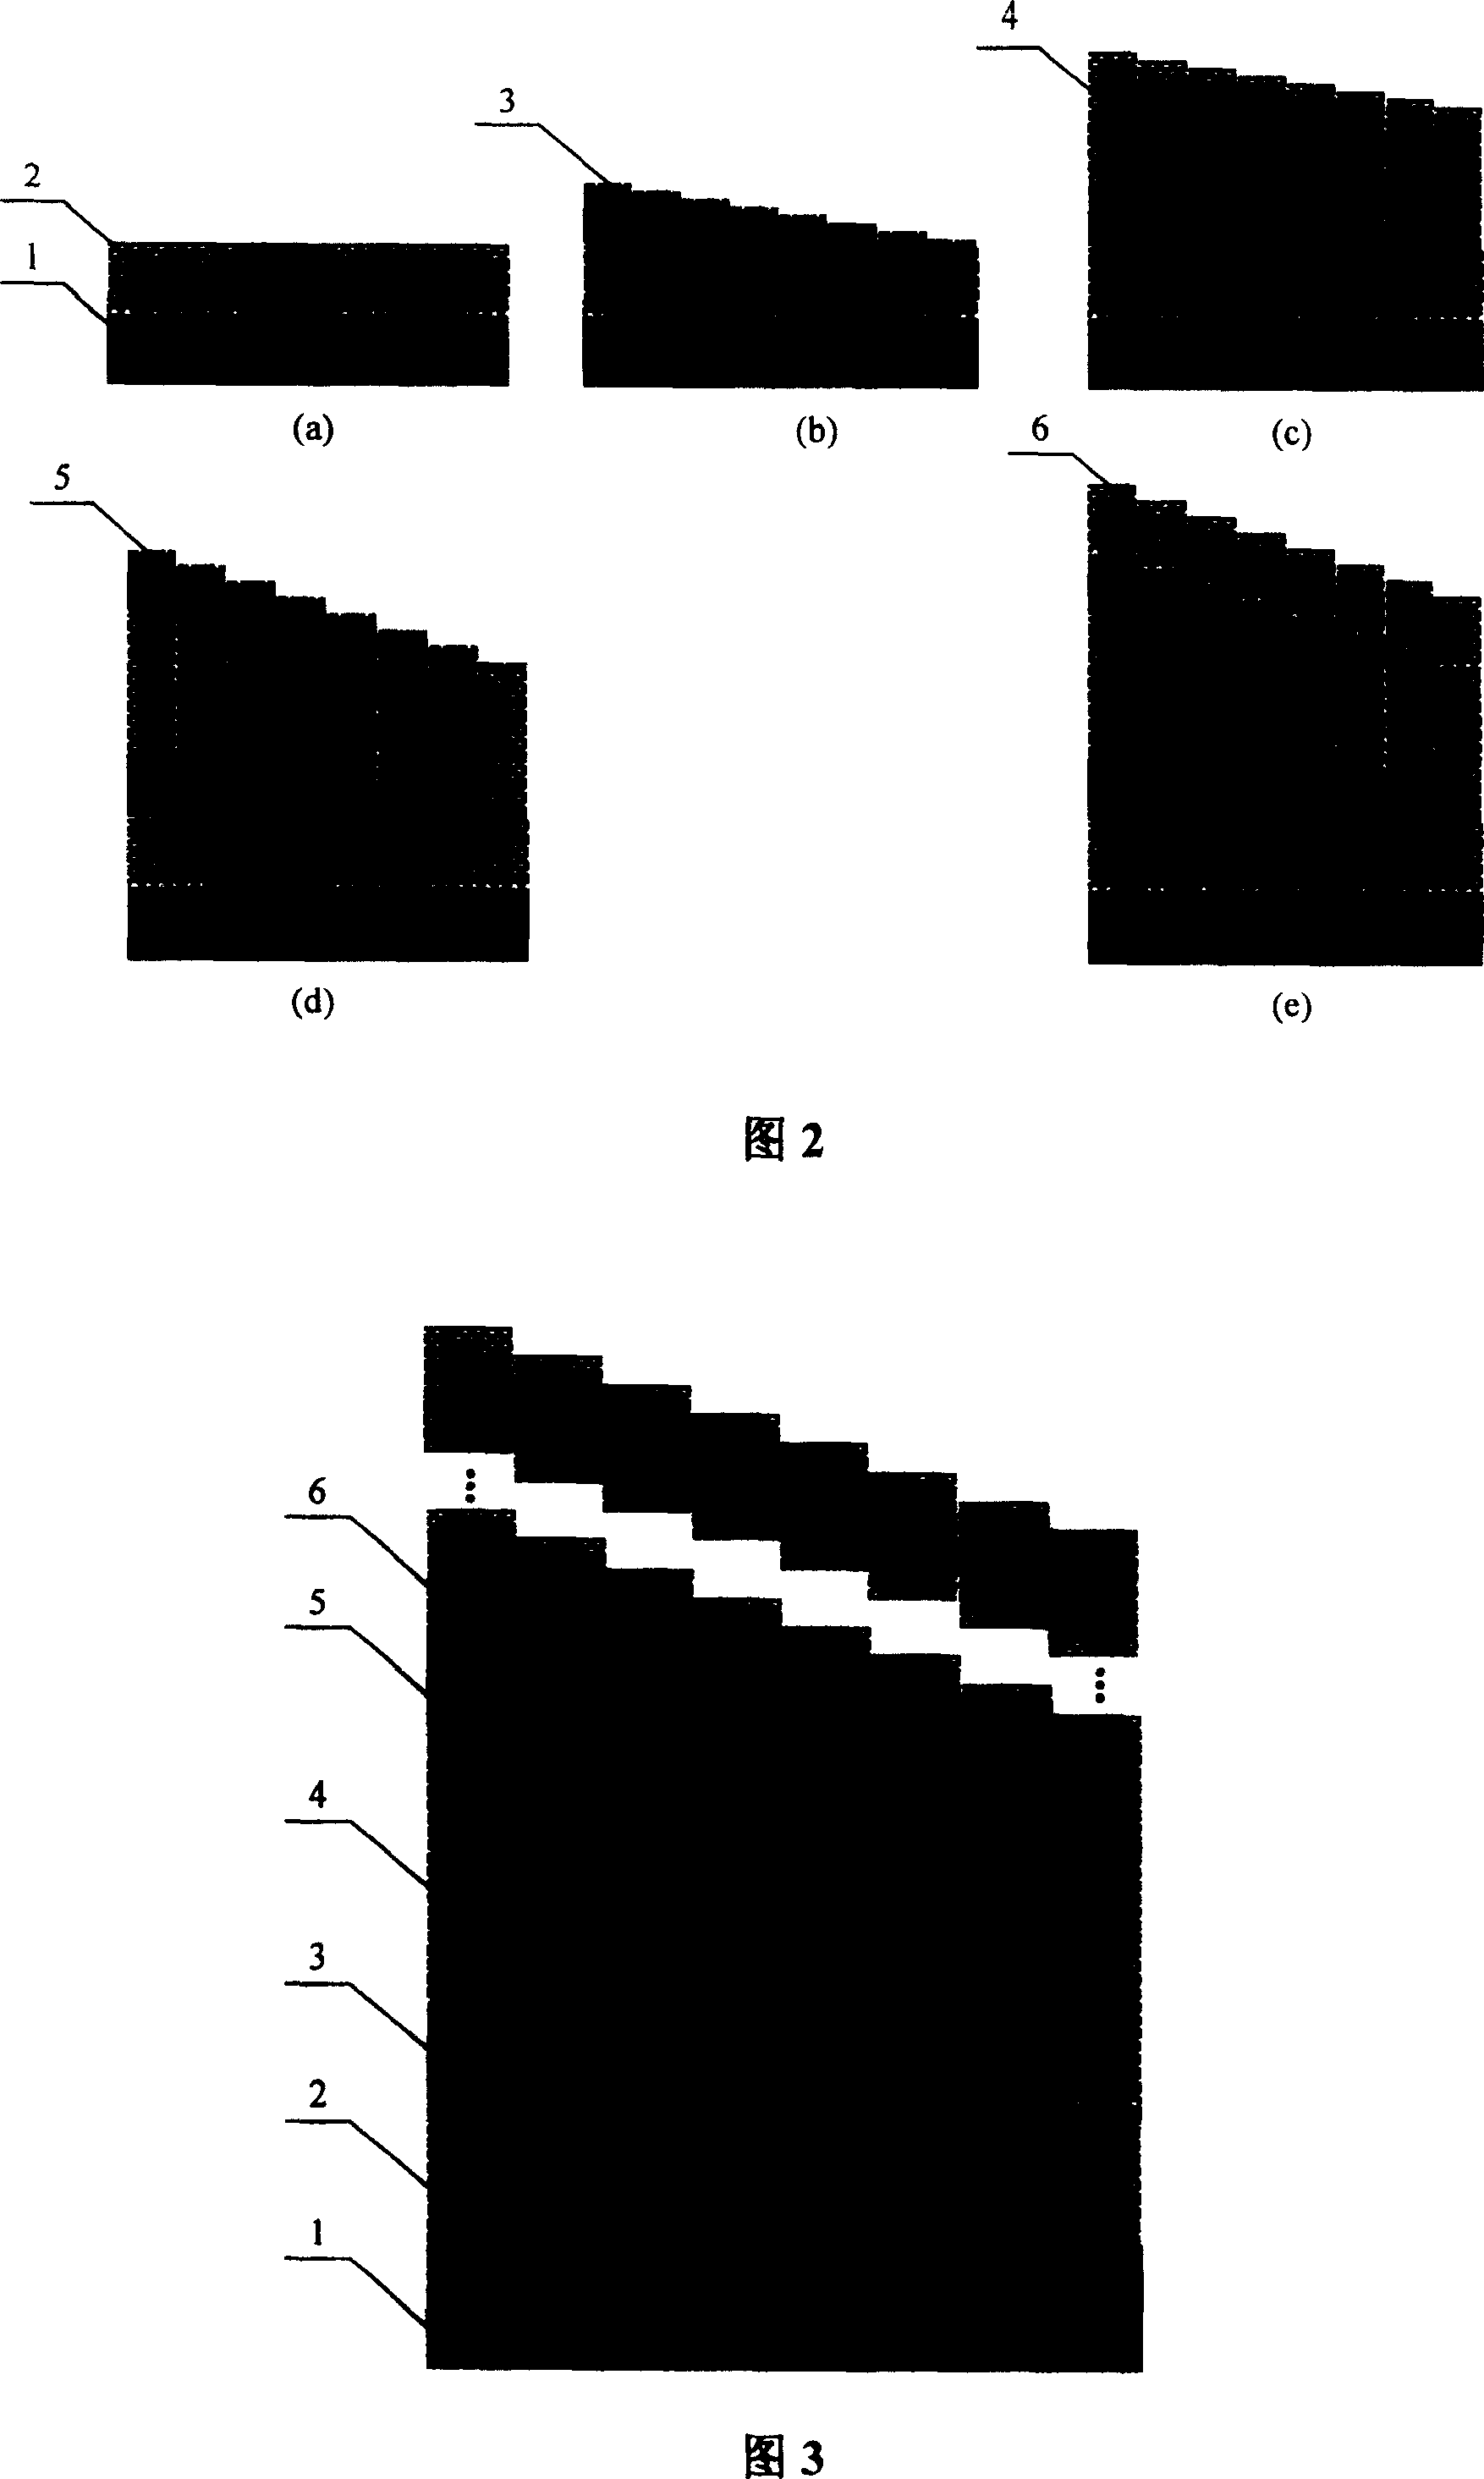 Narrow-band filter array with multi-cavity structure